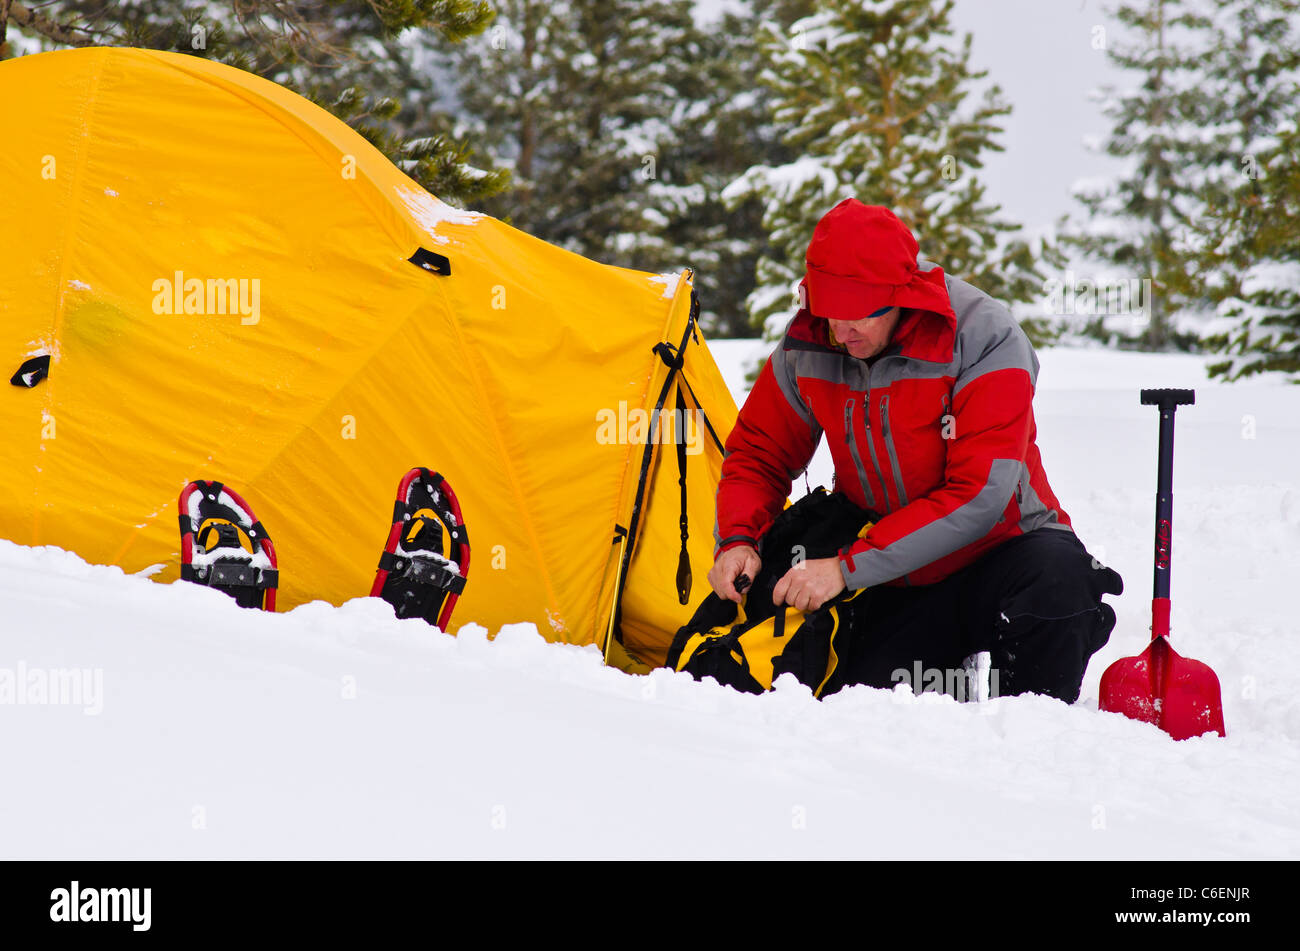 Backcountry skier and yellow dome tent, Ansel Adams Wilderness, Sierra Nevada Mountains, California USA Stock Photo